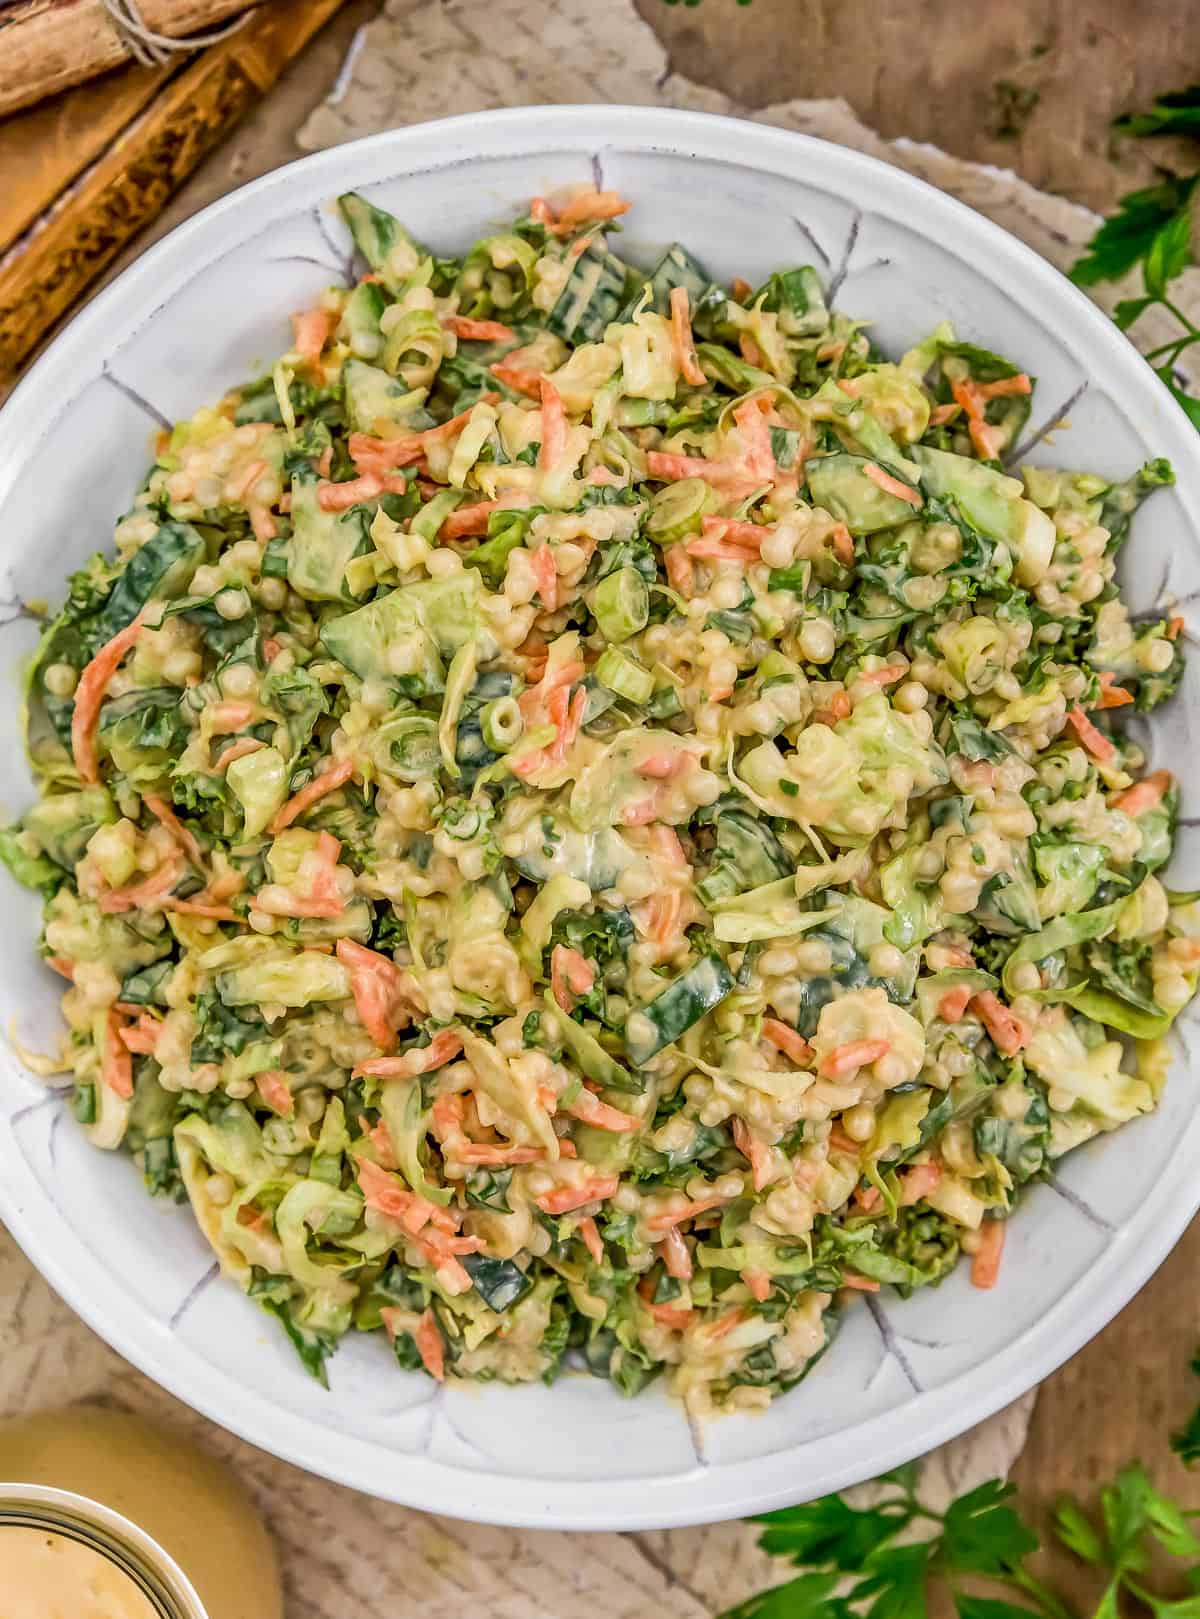 Vegan Buffalo Kale and Brussels Sprouts Chopped Salad